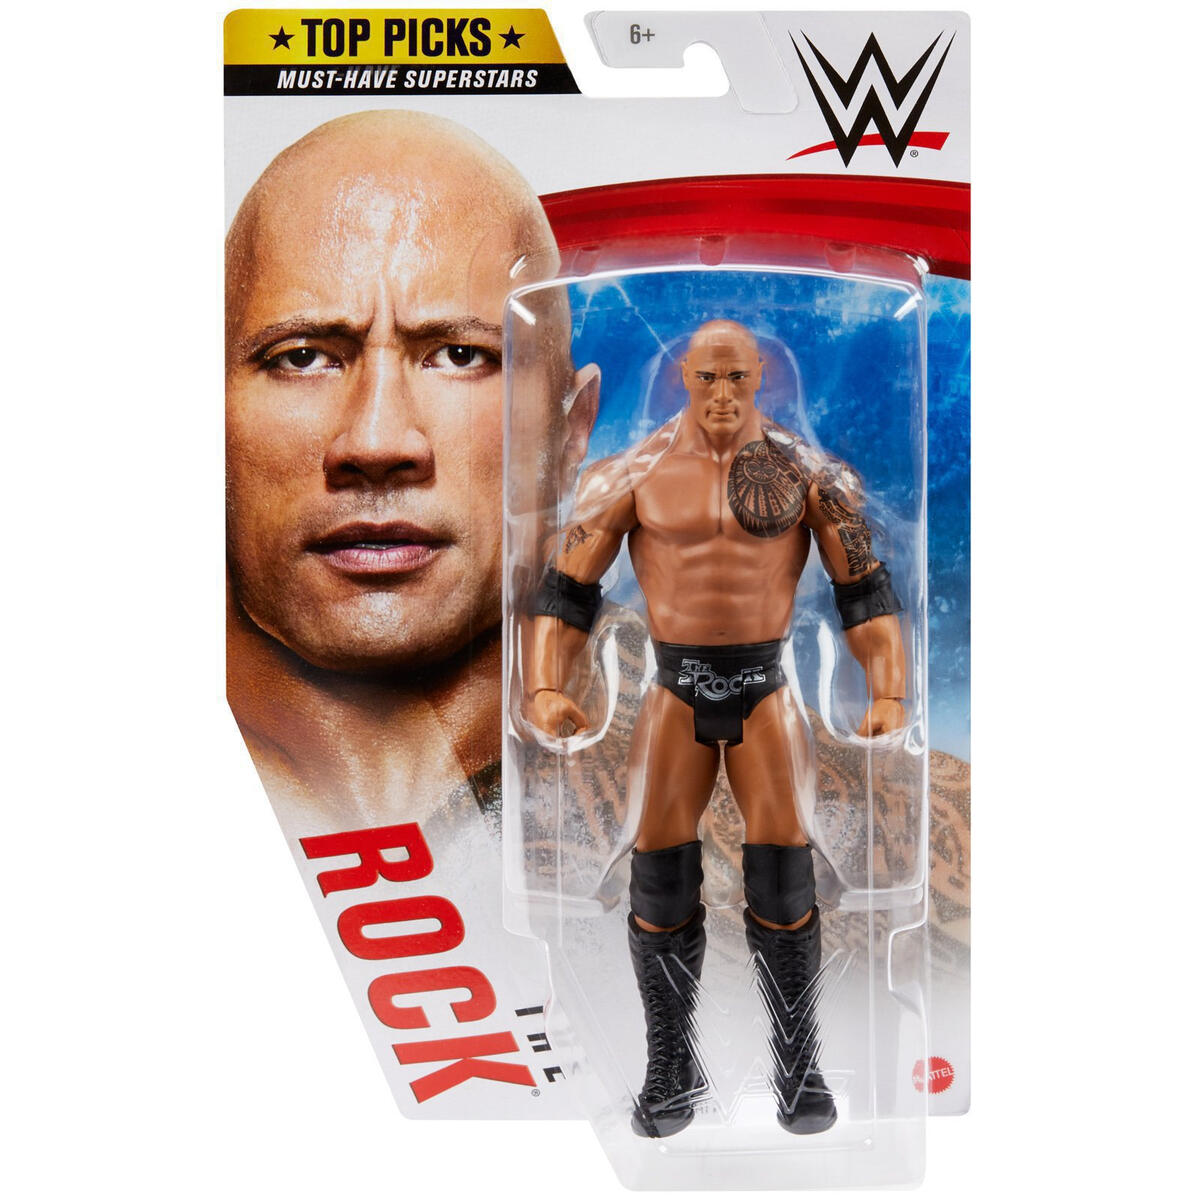 Sneak Peeks At Mattel S Championship Showdown Action Figures And More Photos Wwe